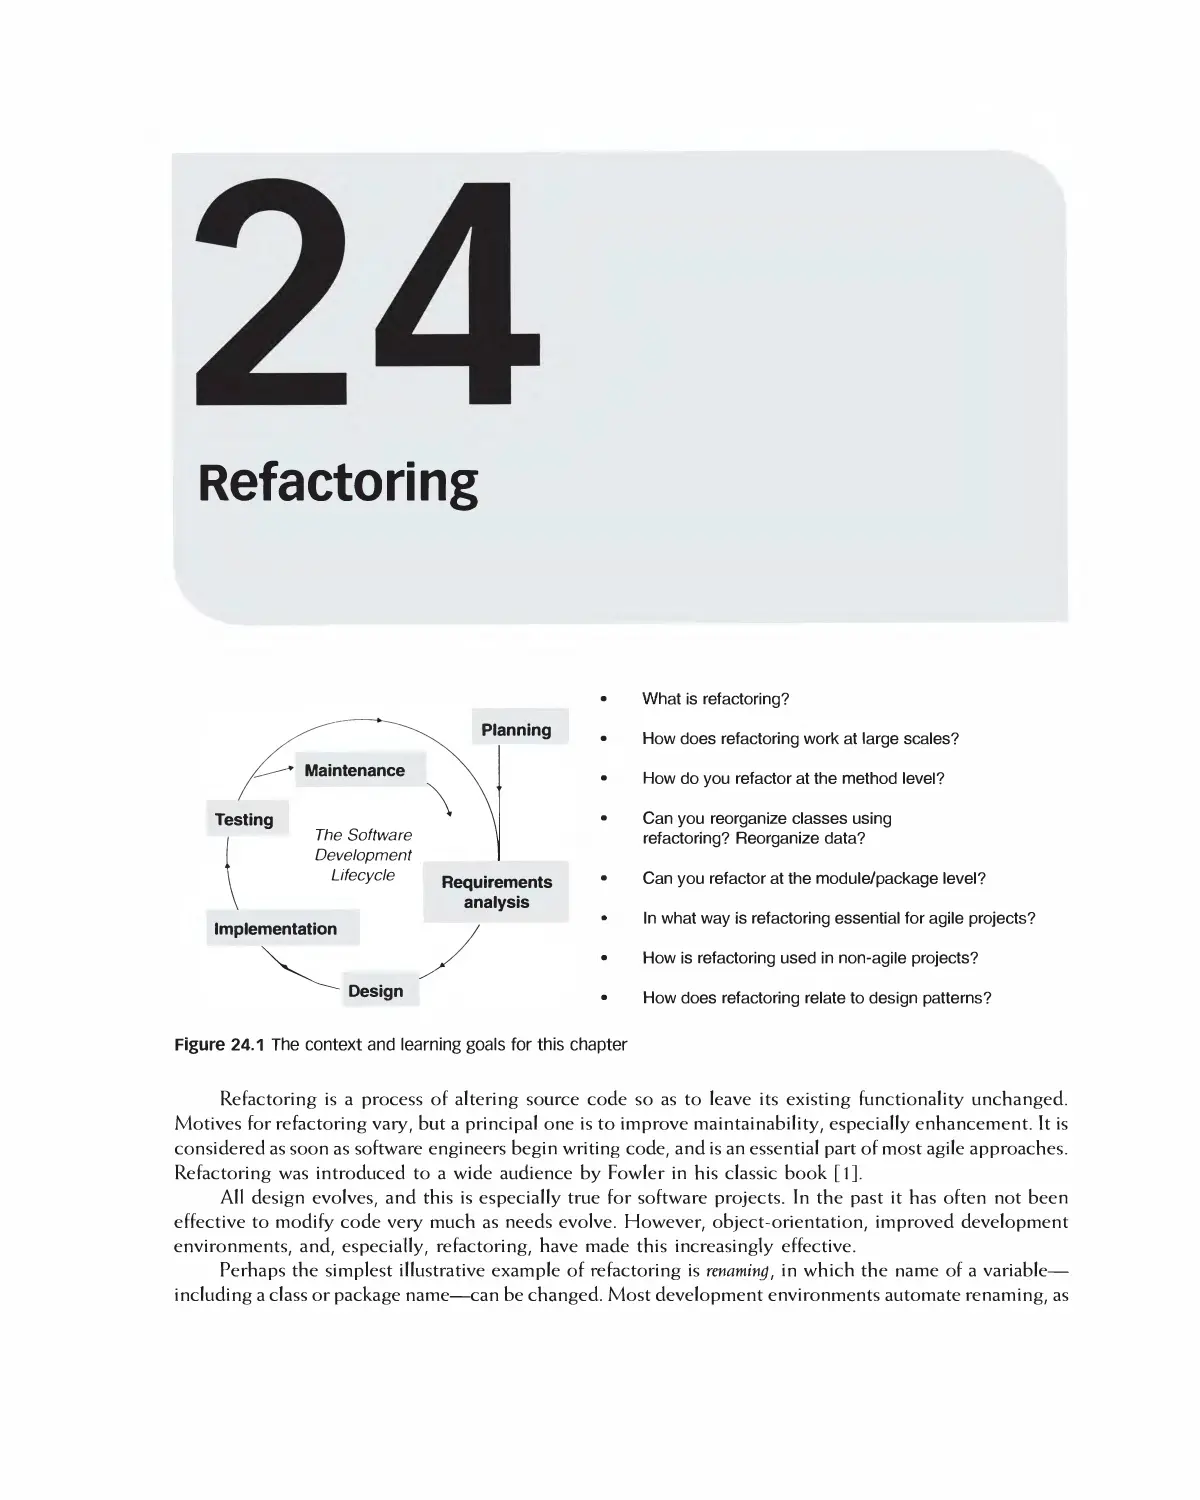 Chapter 24: Refactoring